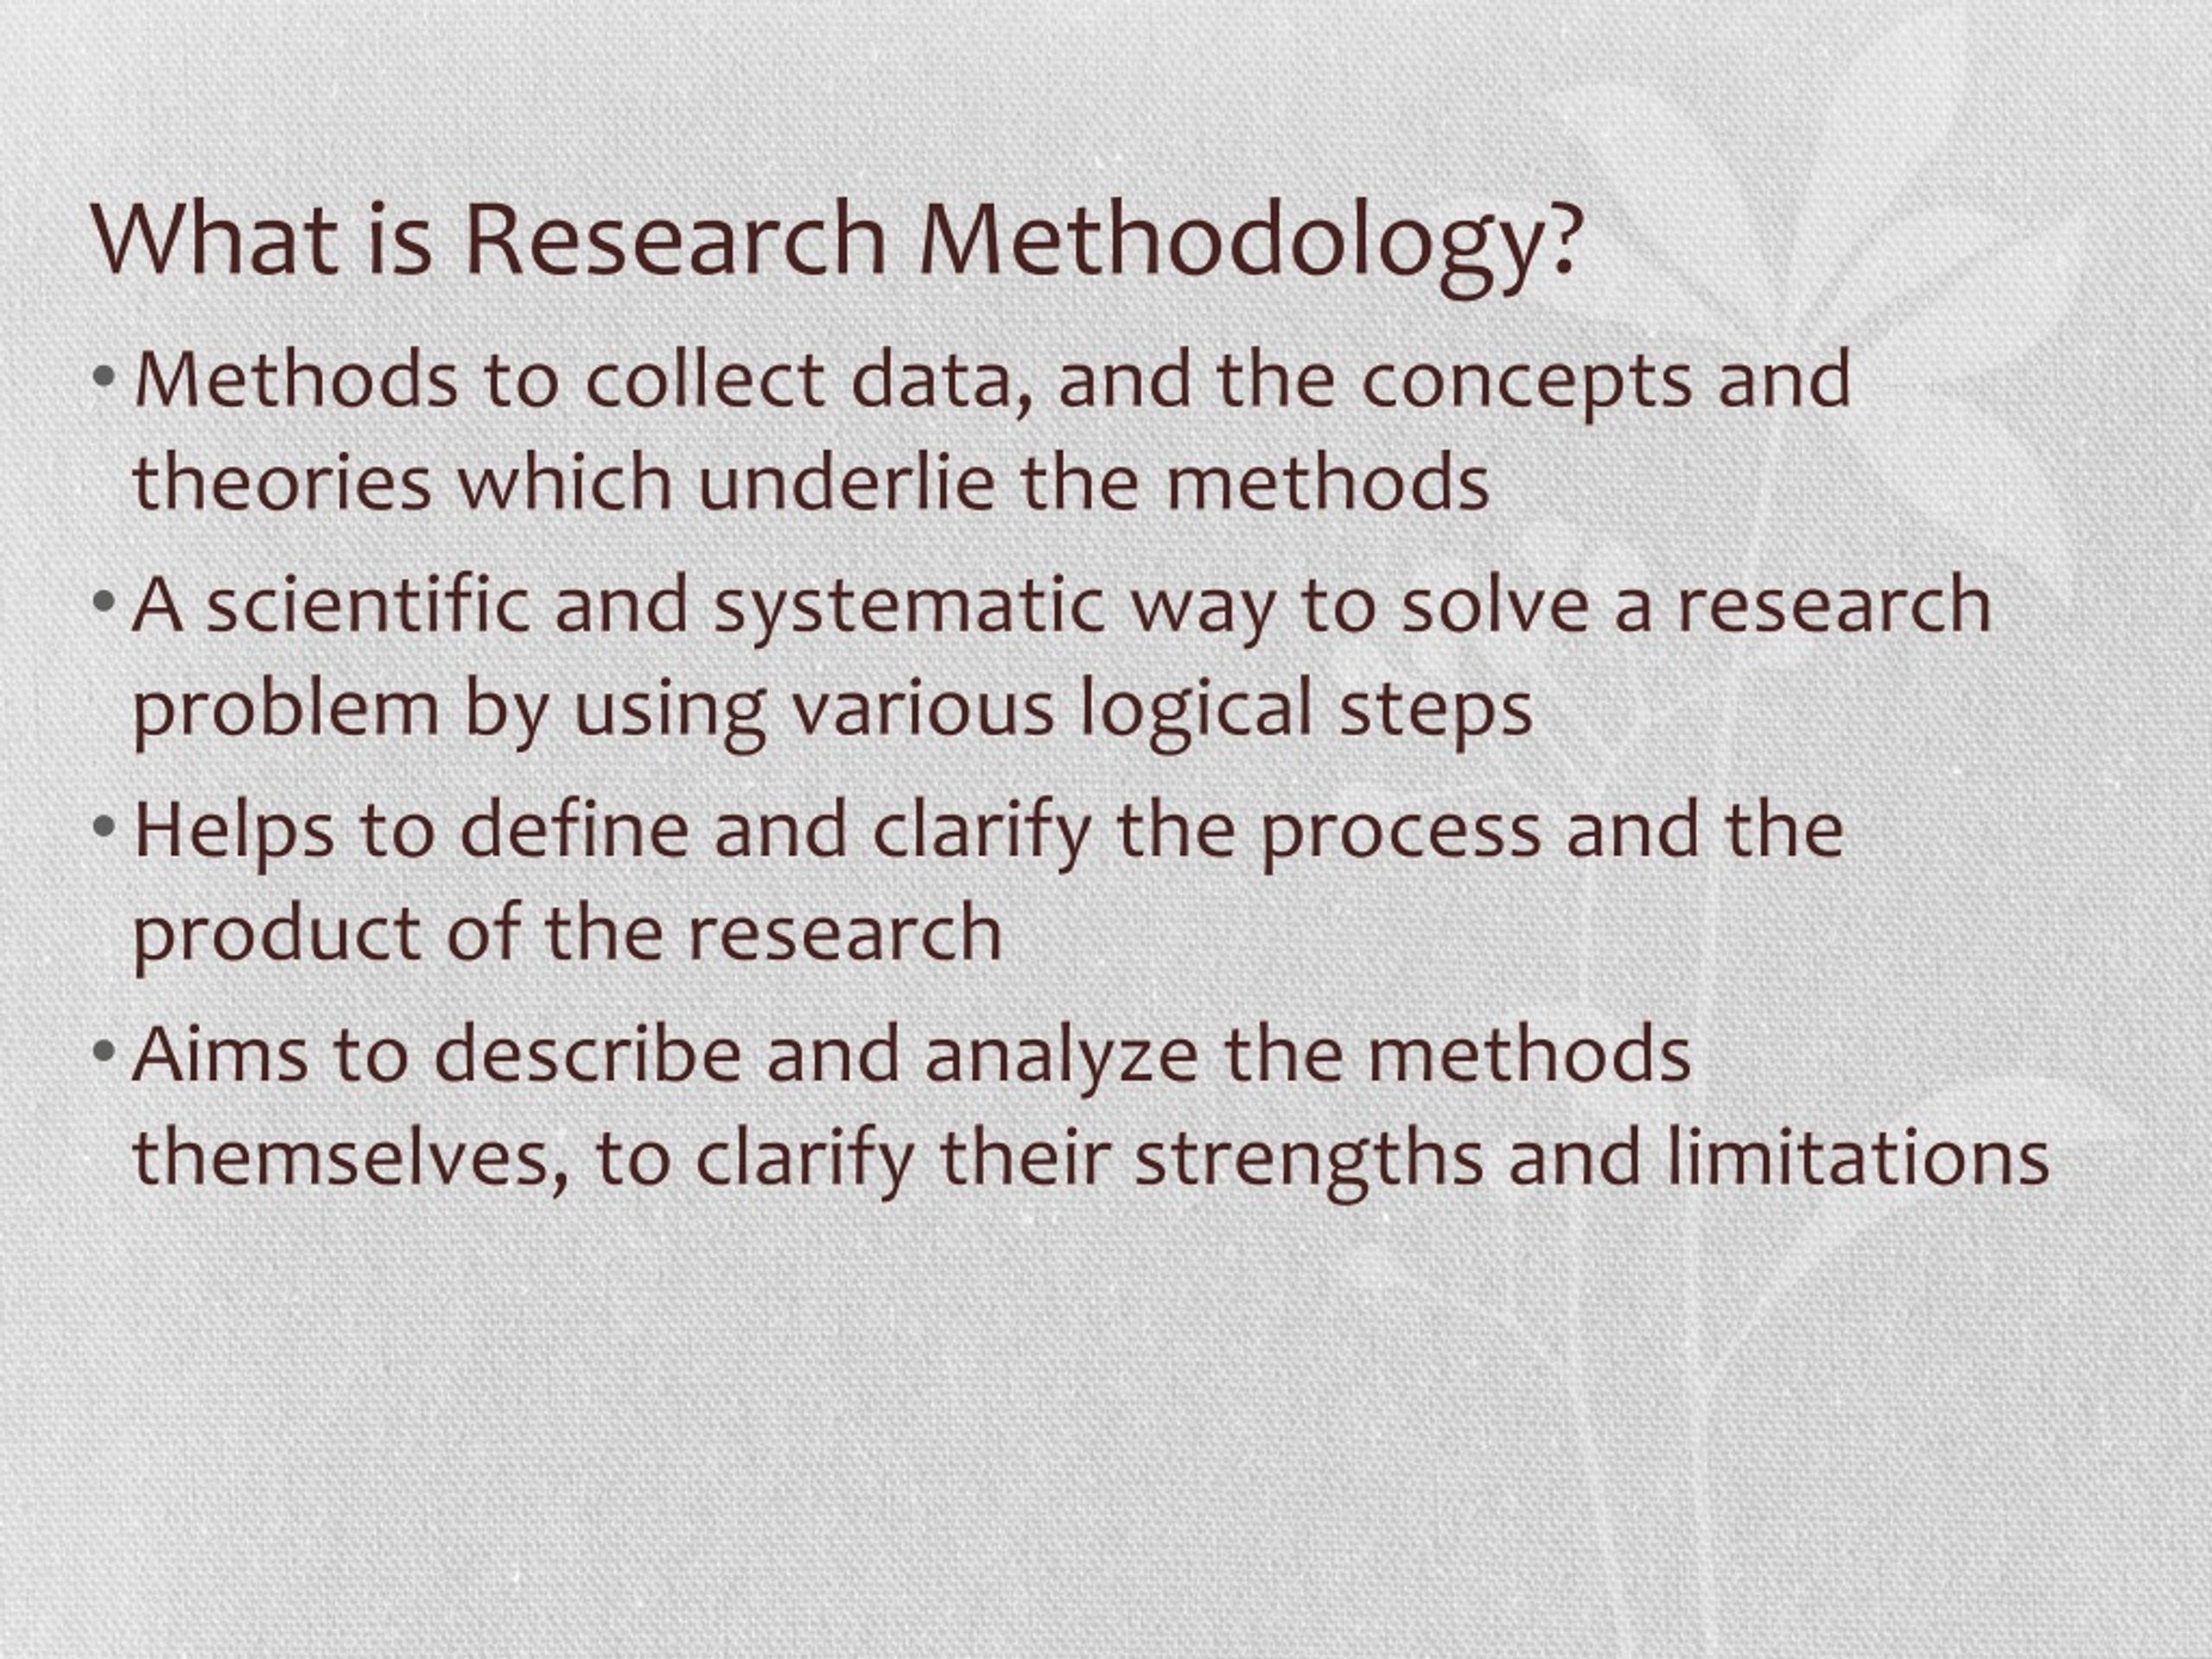 write the meaning of research methodology